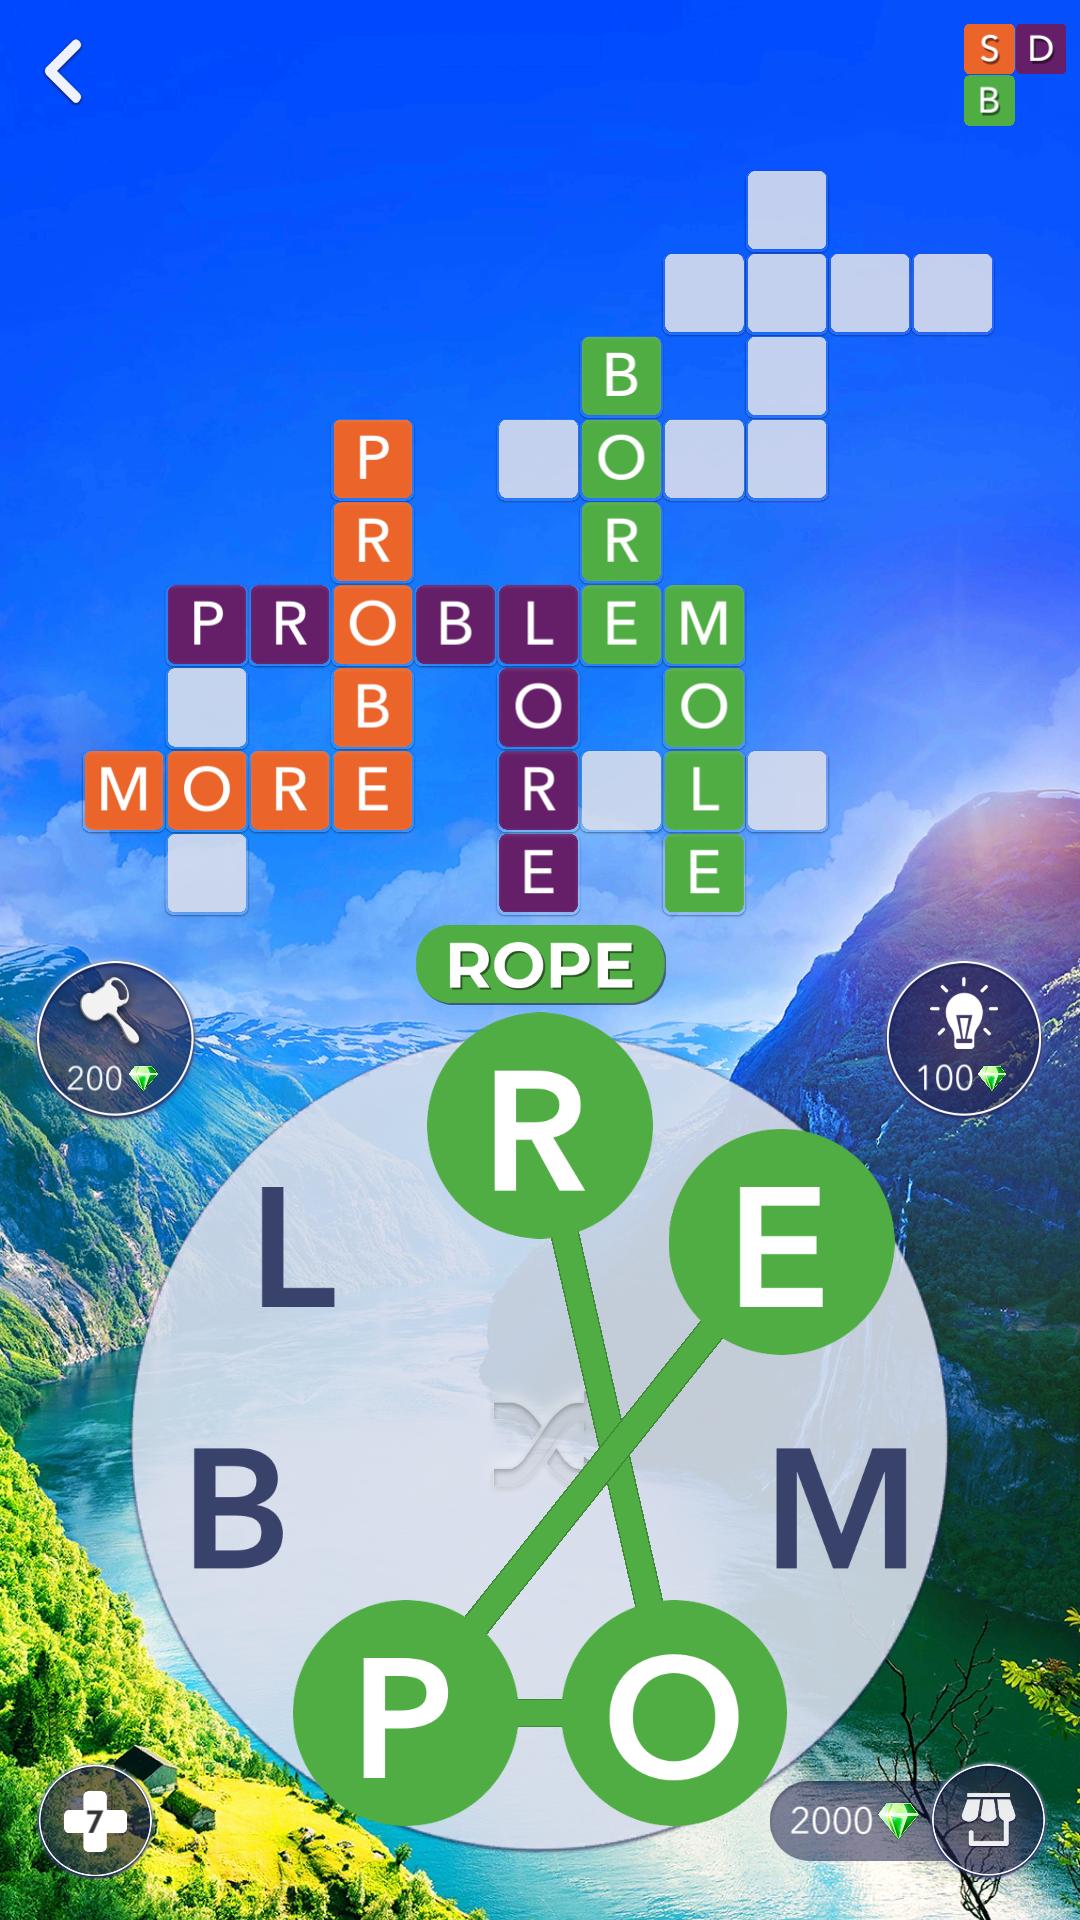 Words of Wonders: Crossword to Connect Vocabulary 2.4.1 Screenshot 6